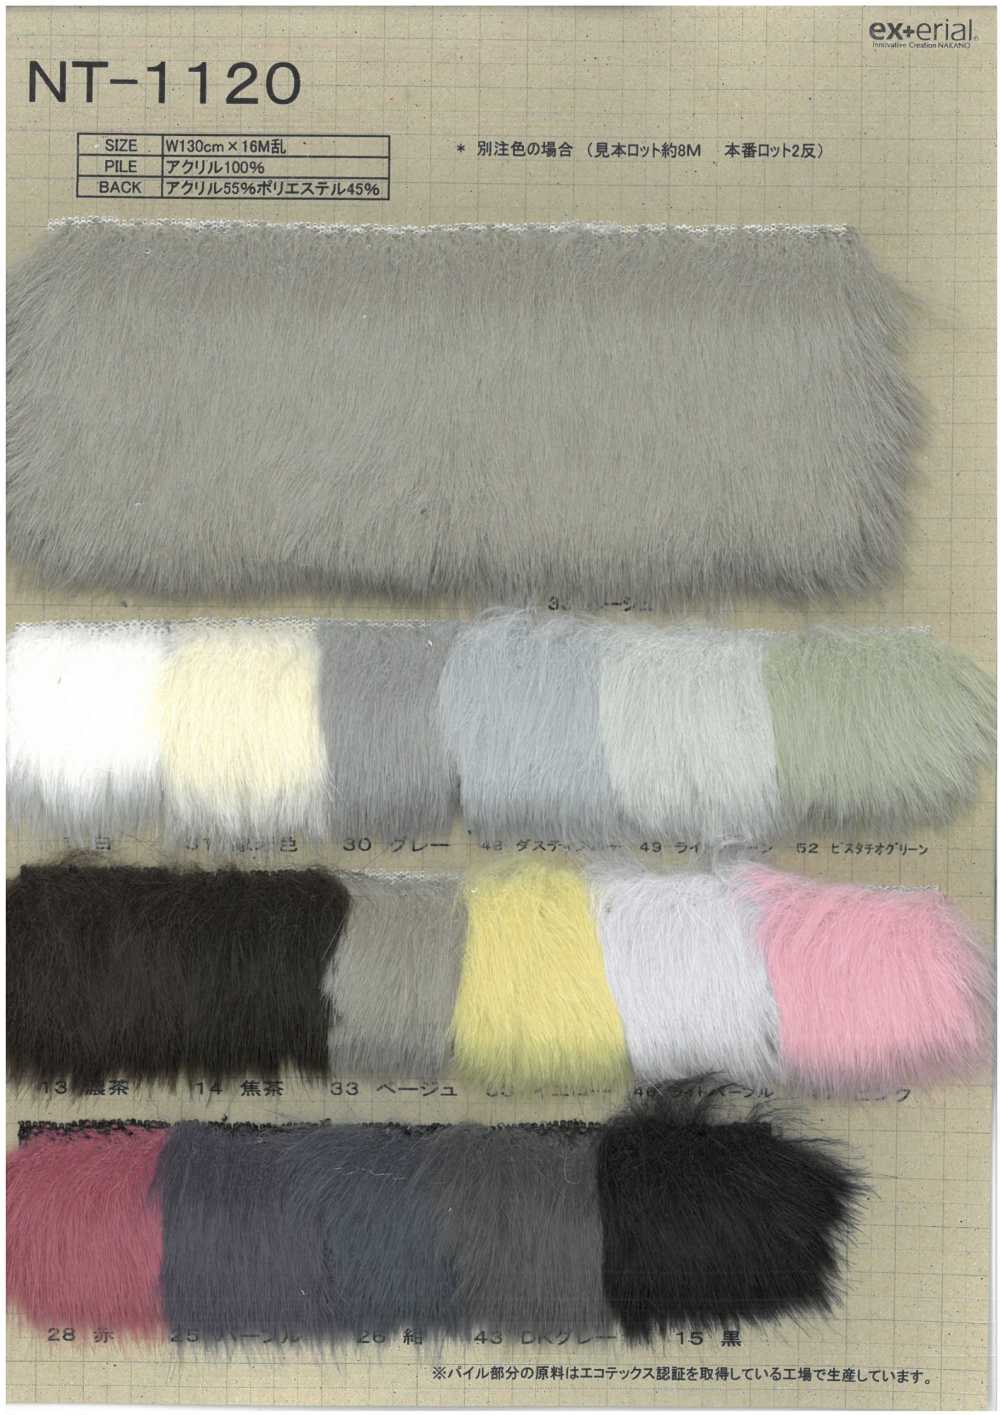 NT-1120 Craft Fur [Natural Fox][Textile / Fabric] Nakano Stockinette Industry